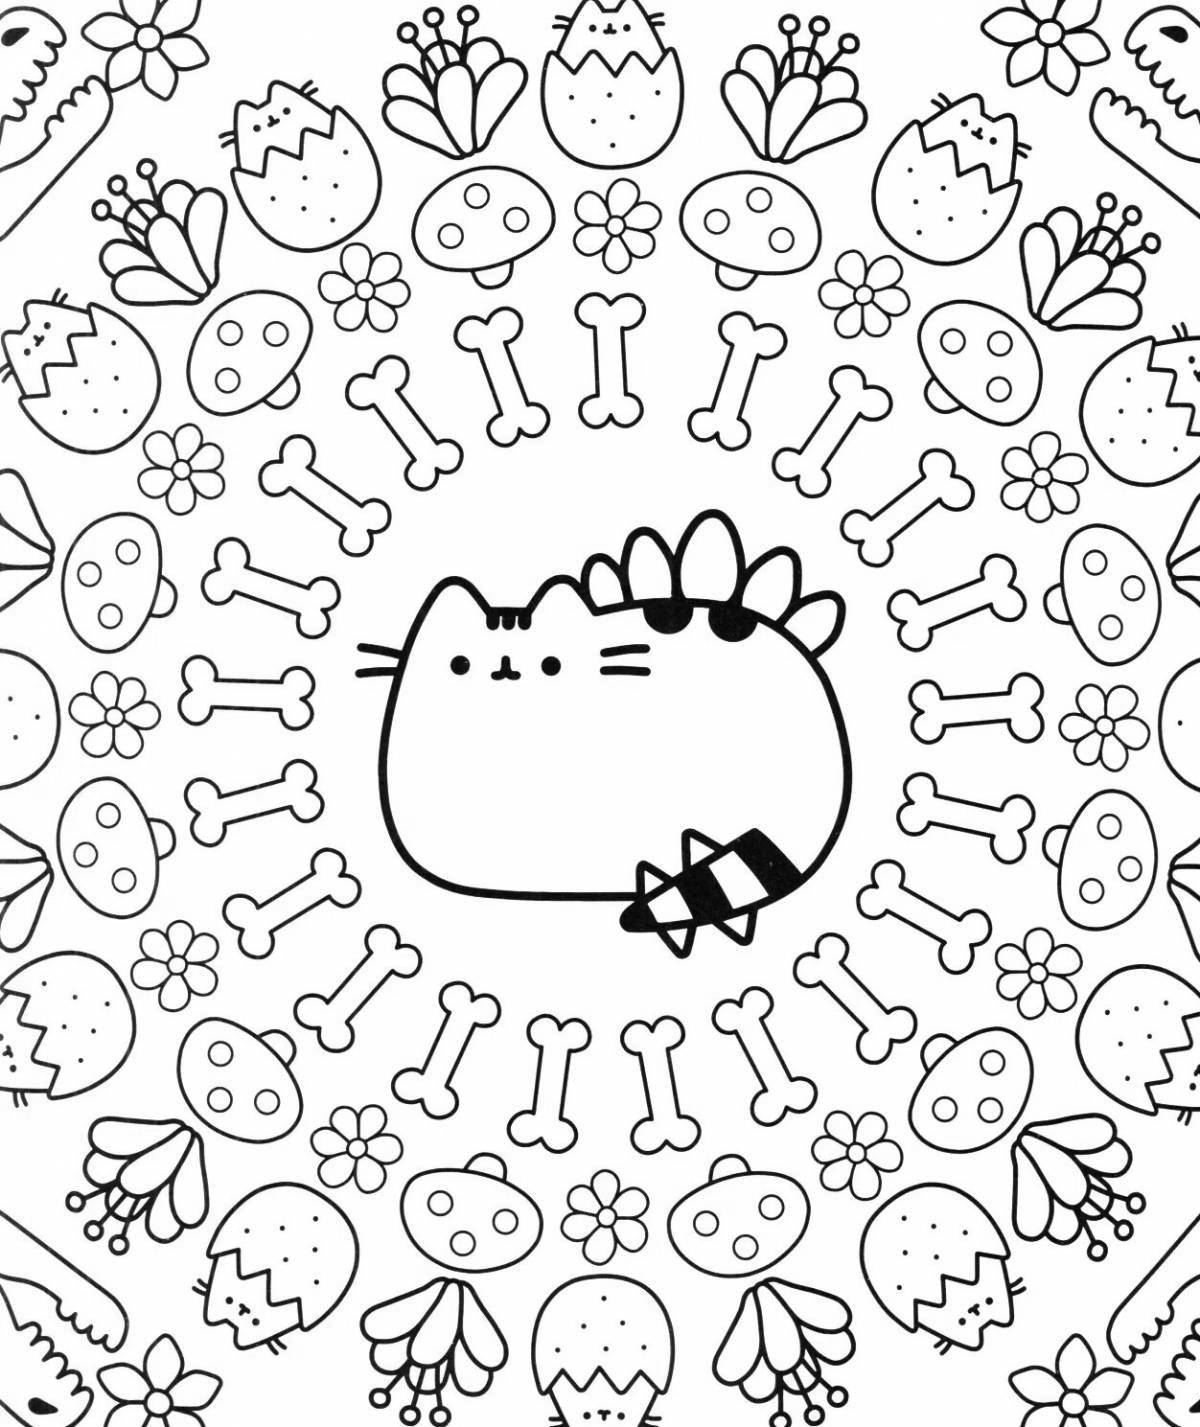 Pusheen cat coloring page for kids